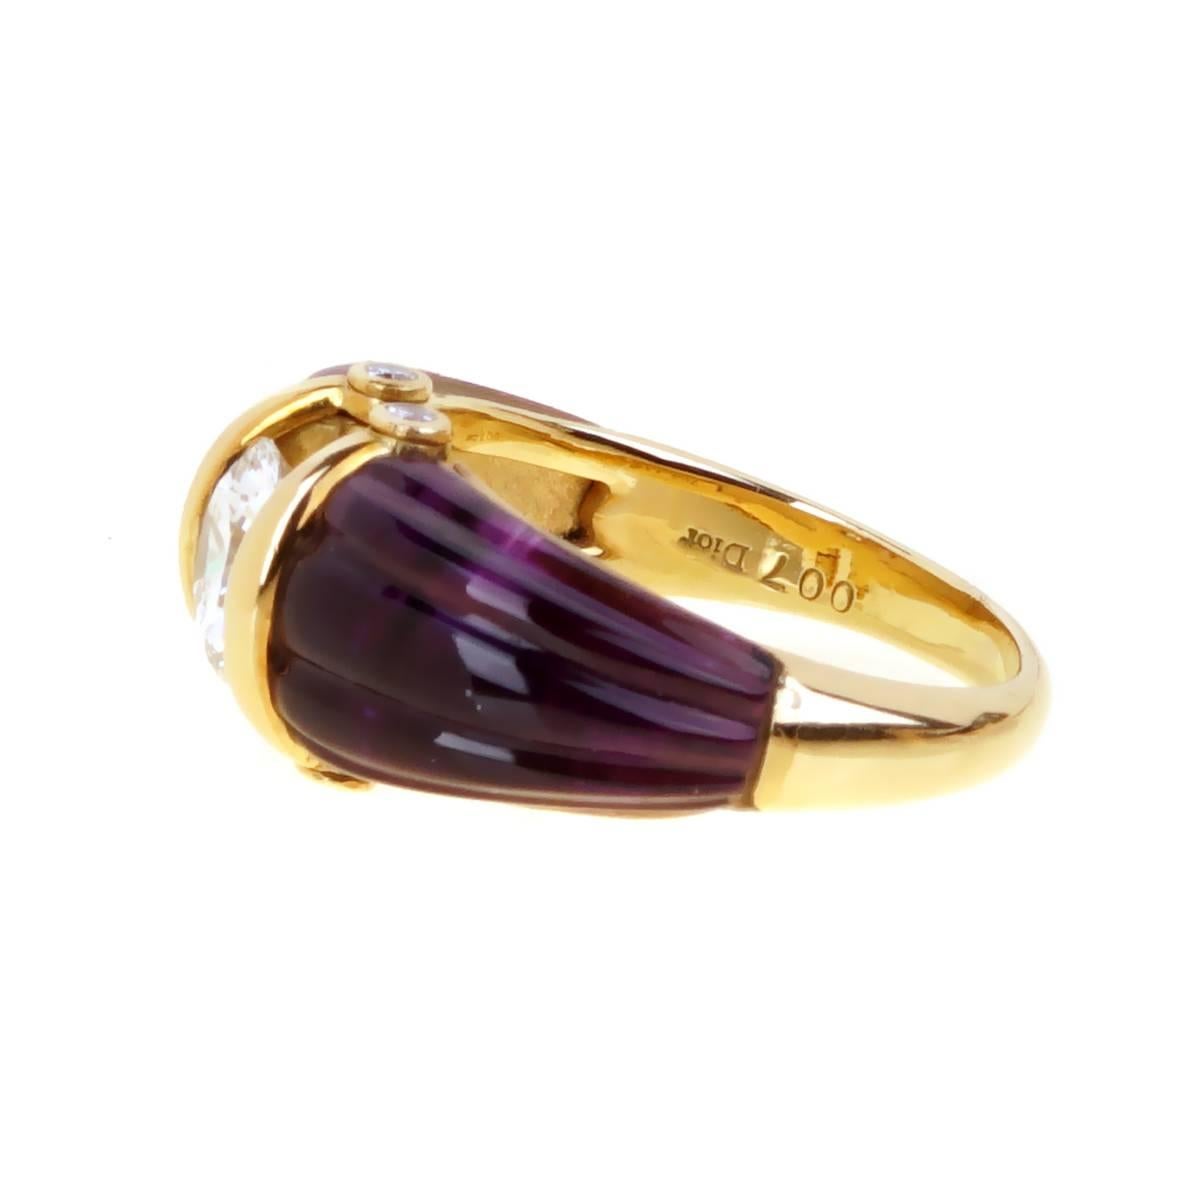 A fabulous ultra chic Dior ring featuring a 2 carved amethyst stones showcasing a 1.14ct round brilliant cut VS diamond in 18k yellow gold. The 2018 color of the year has been chosen by Pantone, Ultra Violet.  Size: 6 1/2 Resizeable

Opulent